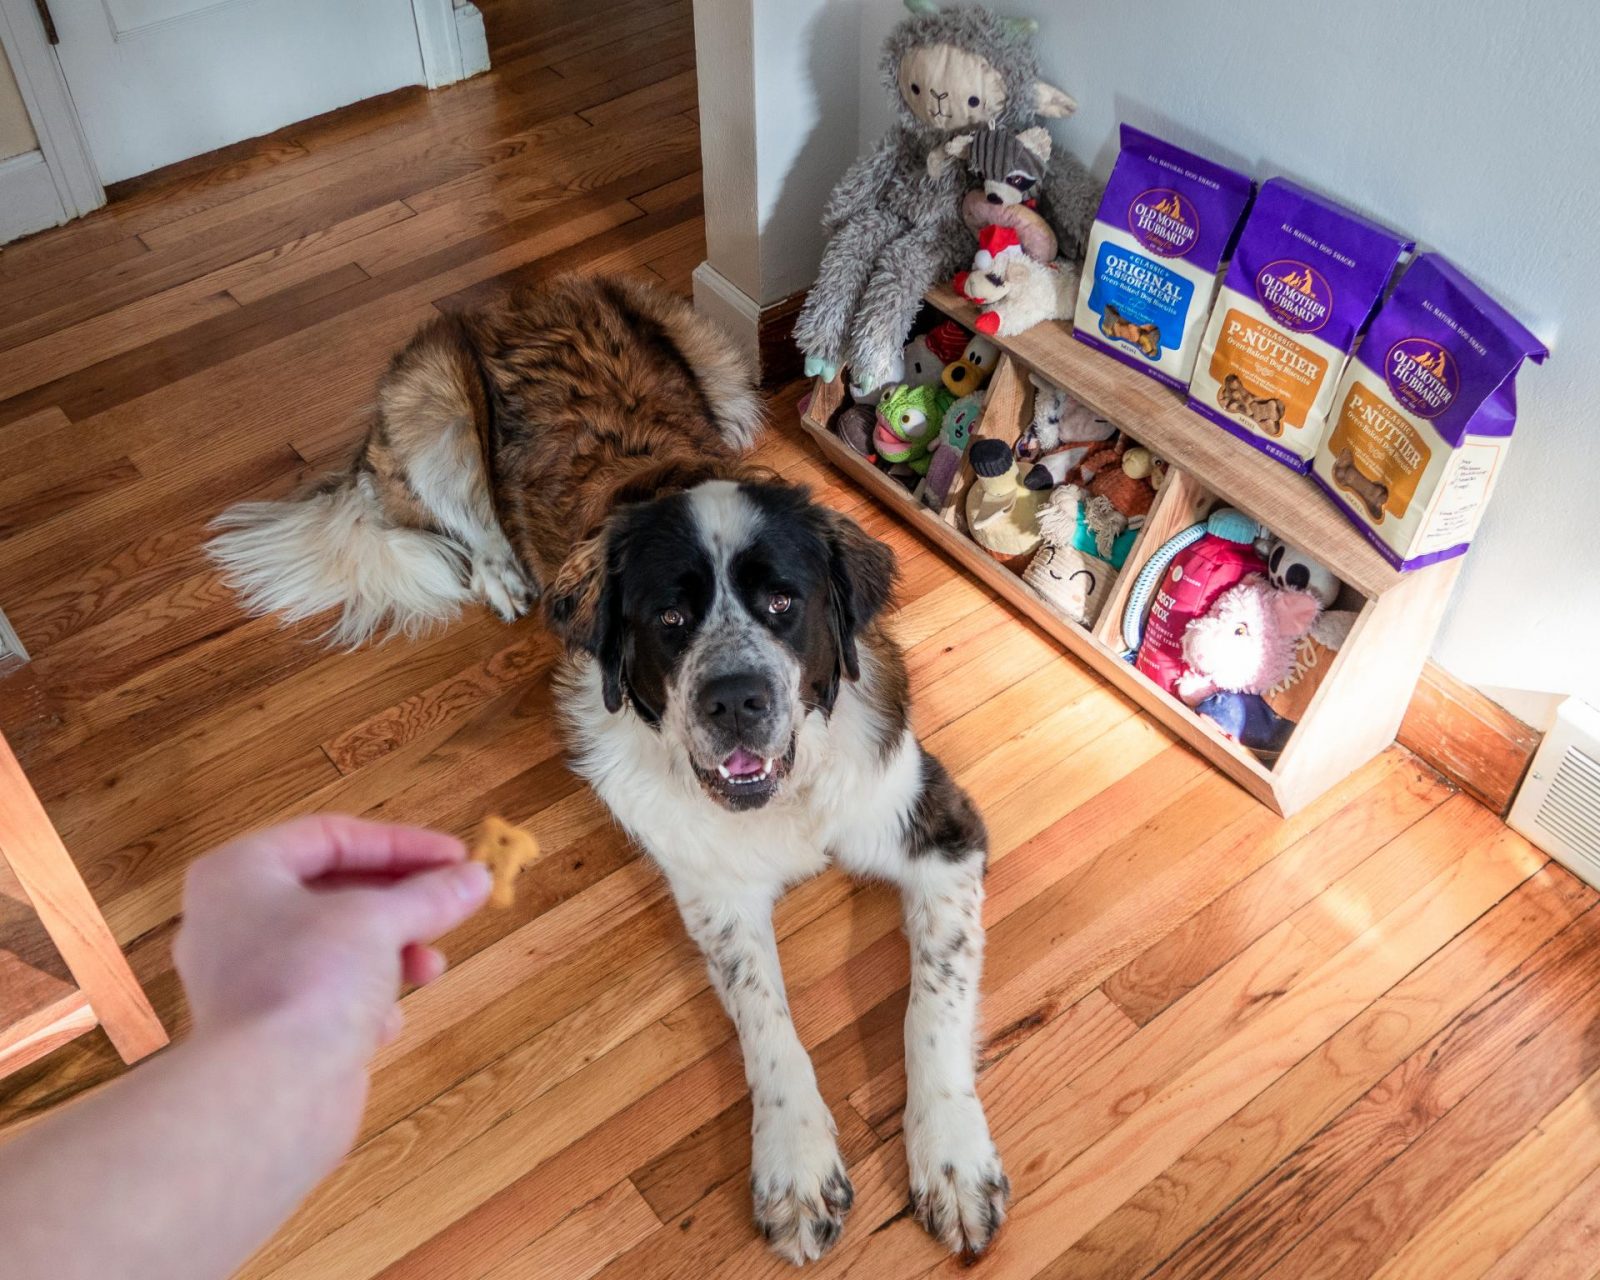 Maisie the Saint Bernard lies on the floor looking happy while a hand offers her an Old Mother Hubbard bone shaped dog treat.